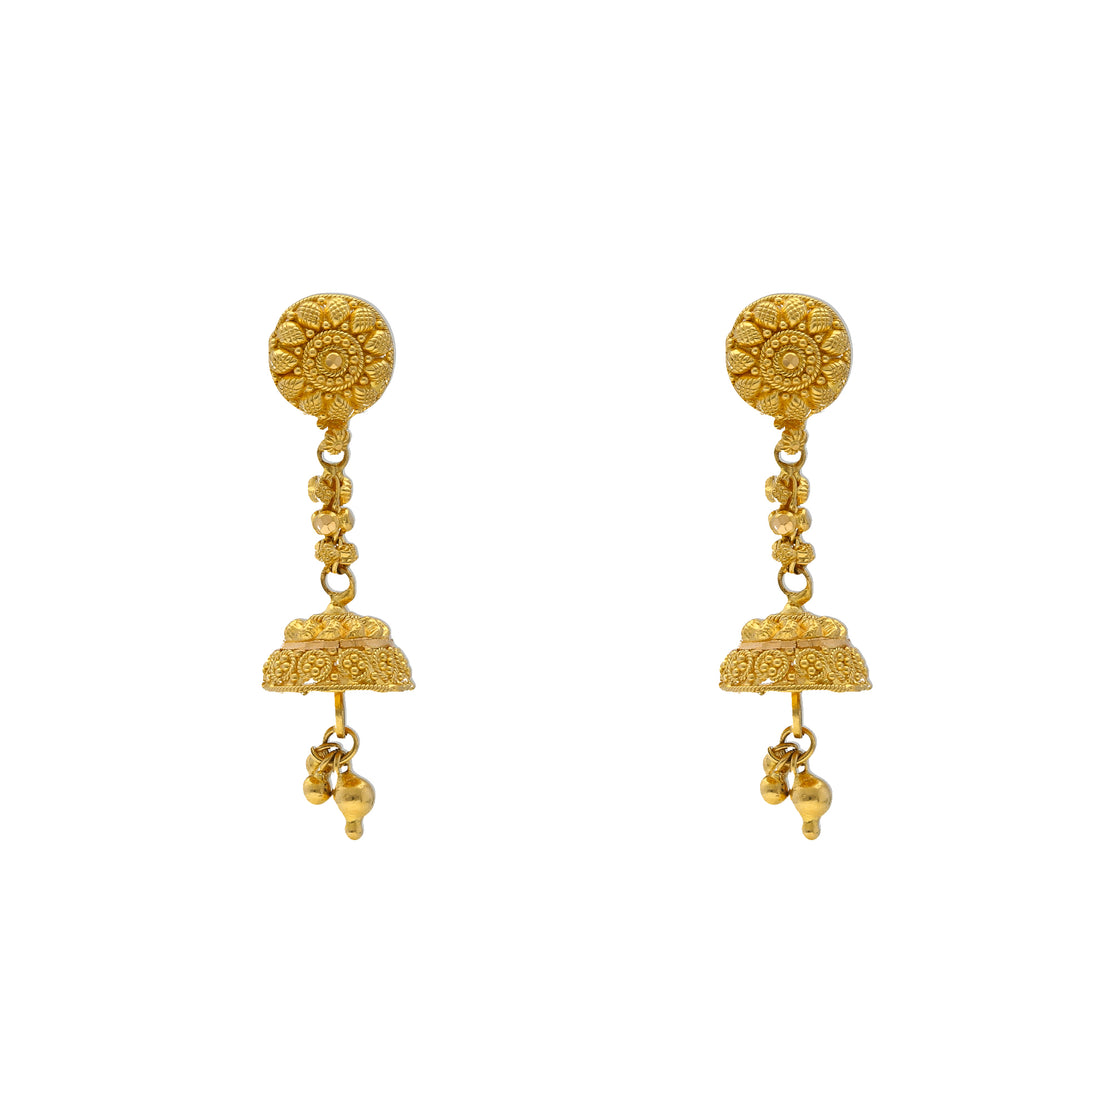 The Puppy Fancy Gold Earring (Emerald ) – Welcome to Rani Alankar